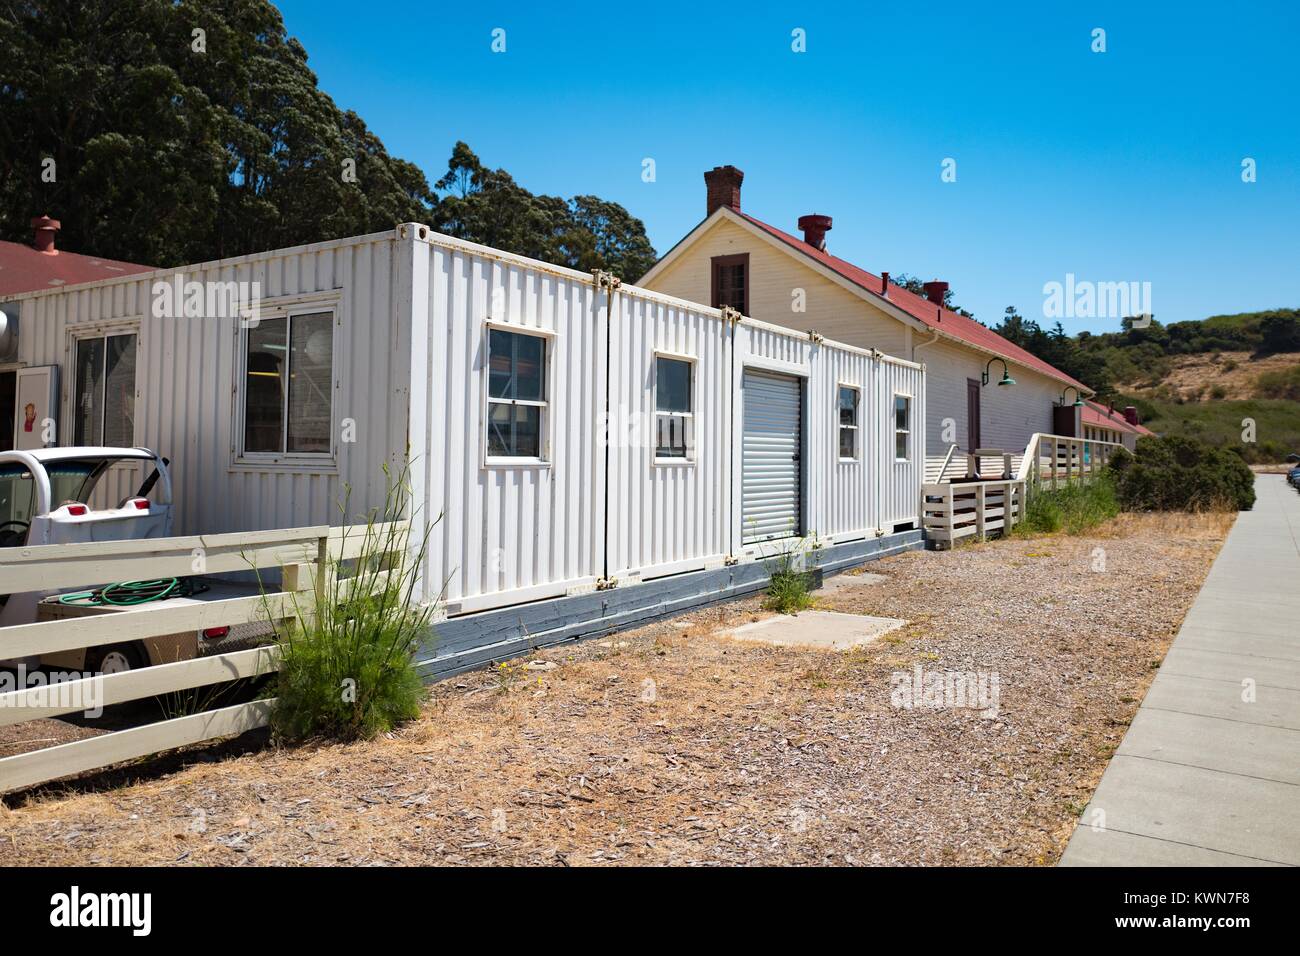 Red-topped, historical buildings with temporary corrugated iron buildings are visible at Fort Baker in the Marin Headlands, Marin County, Sausalito, California, July 19, 2017. Stock Photo